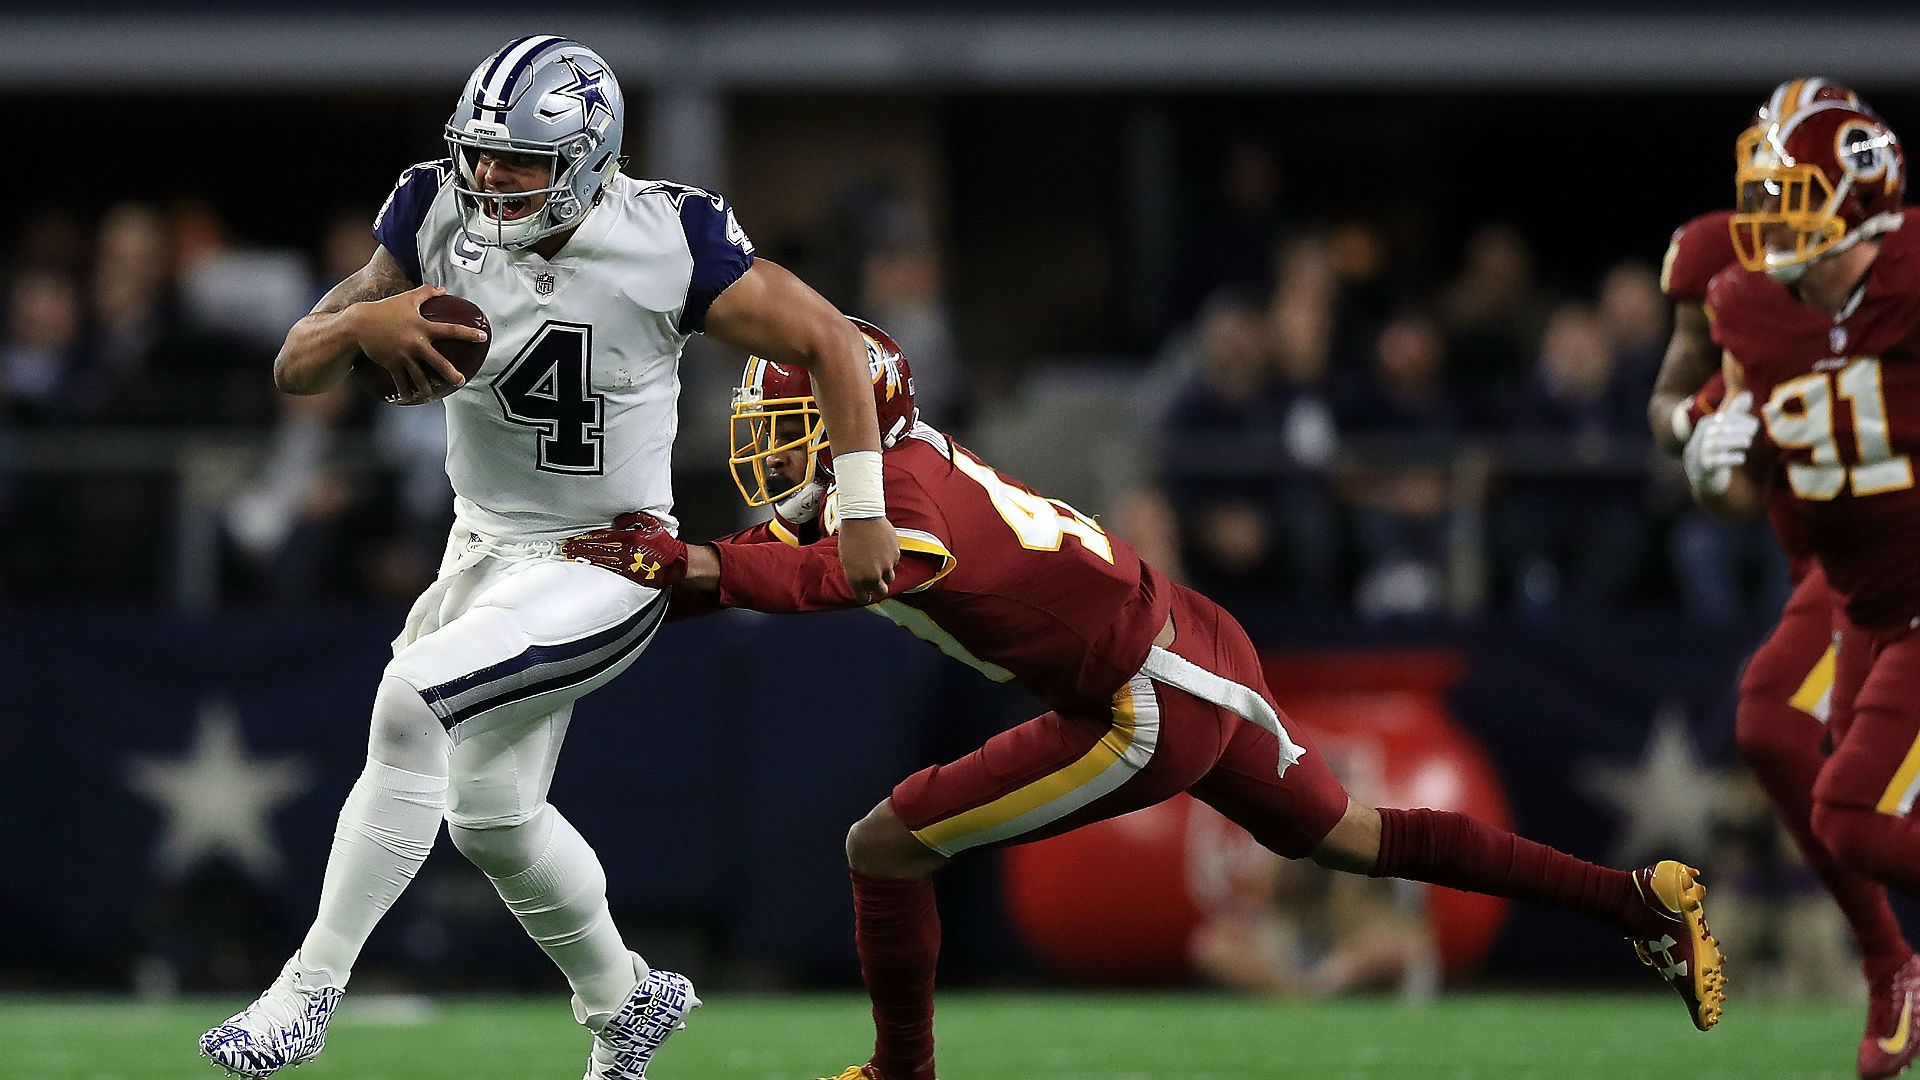 Cowboys vs. Redskins Score, results, highlights from Thursday night